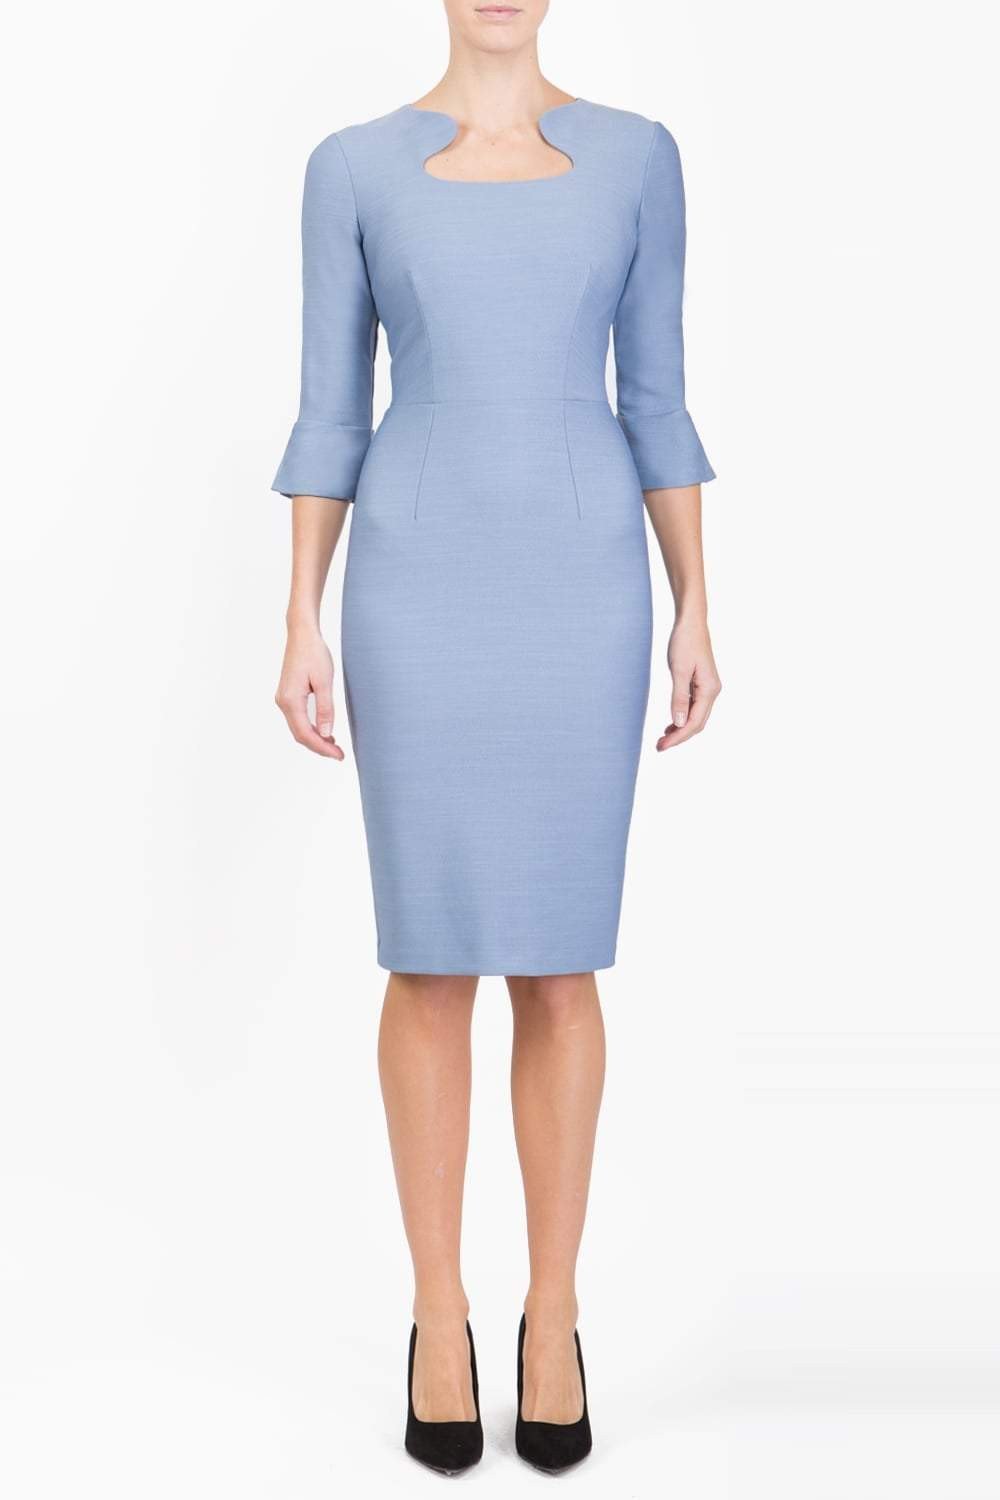 Brunette model is wearing couture stretch seed pencil bell 3/4 sleeve pencil dress by diva catwalk in Steel Blue front image